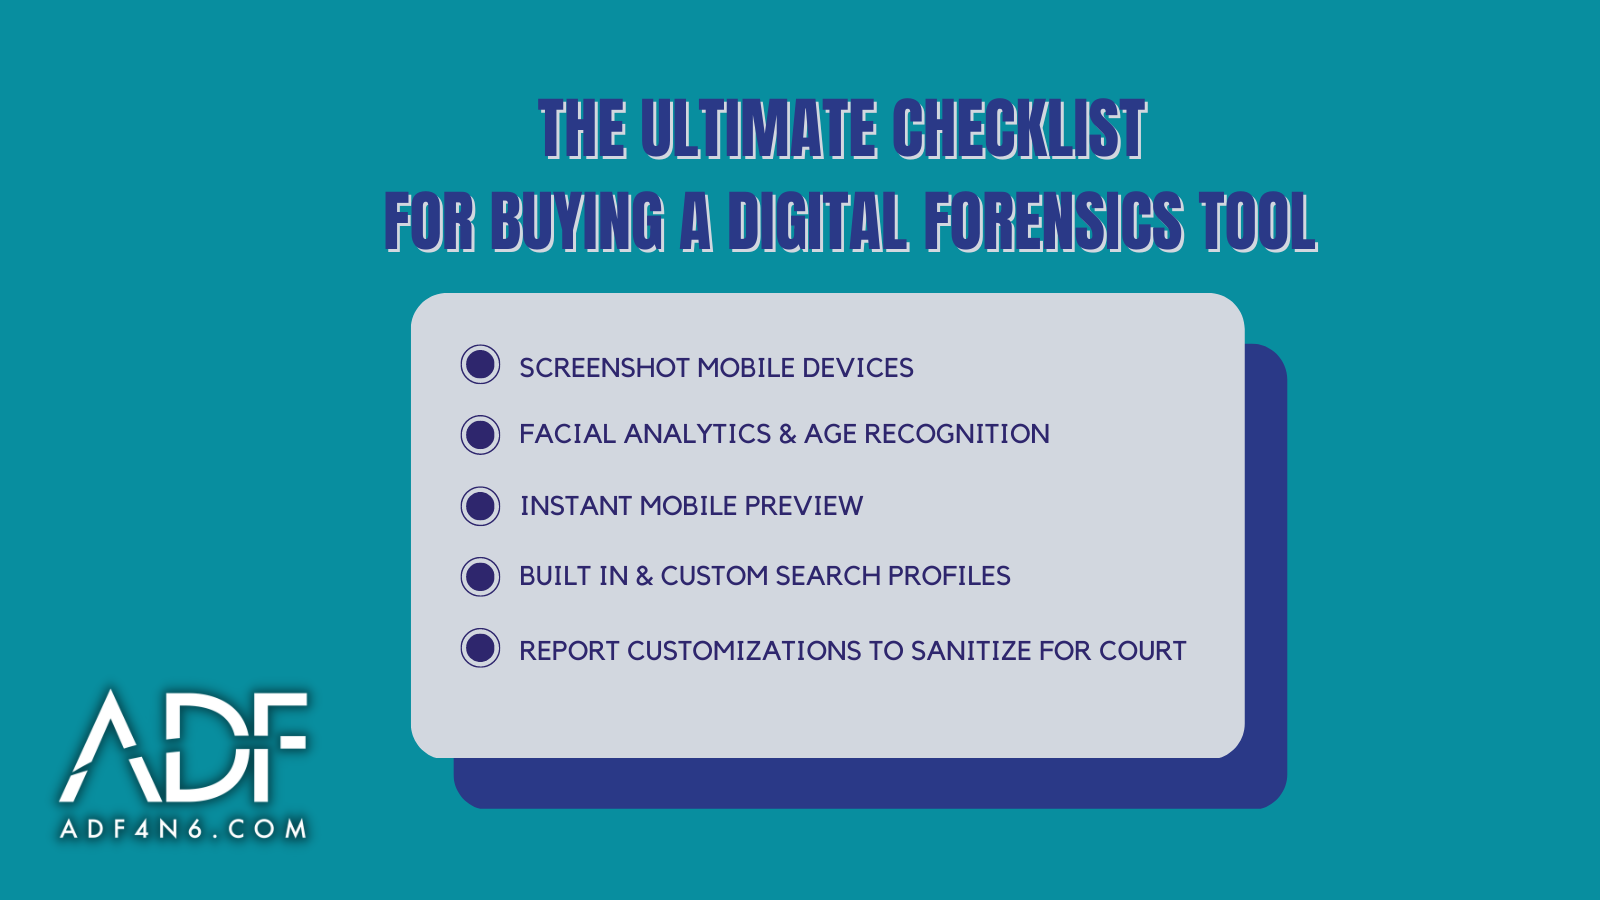 The Ultimate Checklist for Buying a Digital Forensics Tool